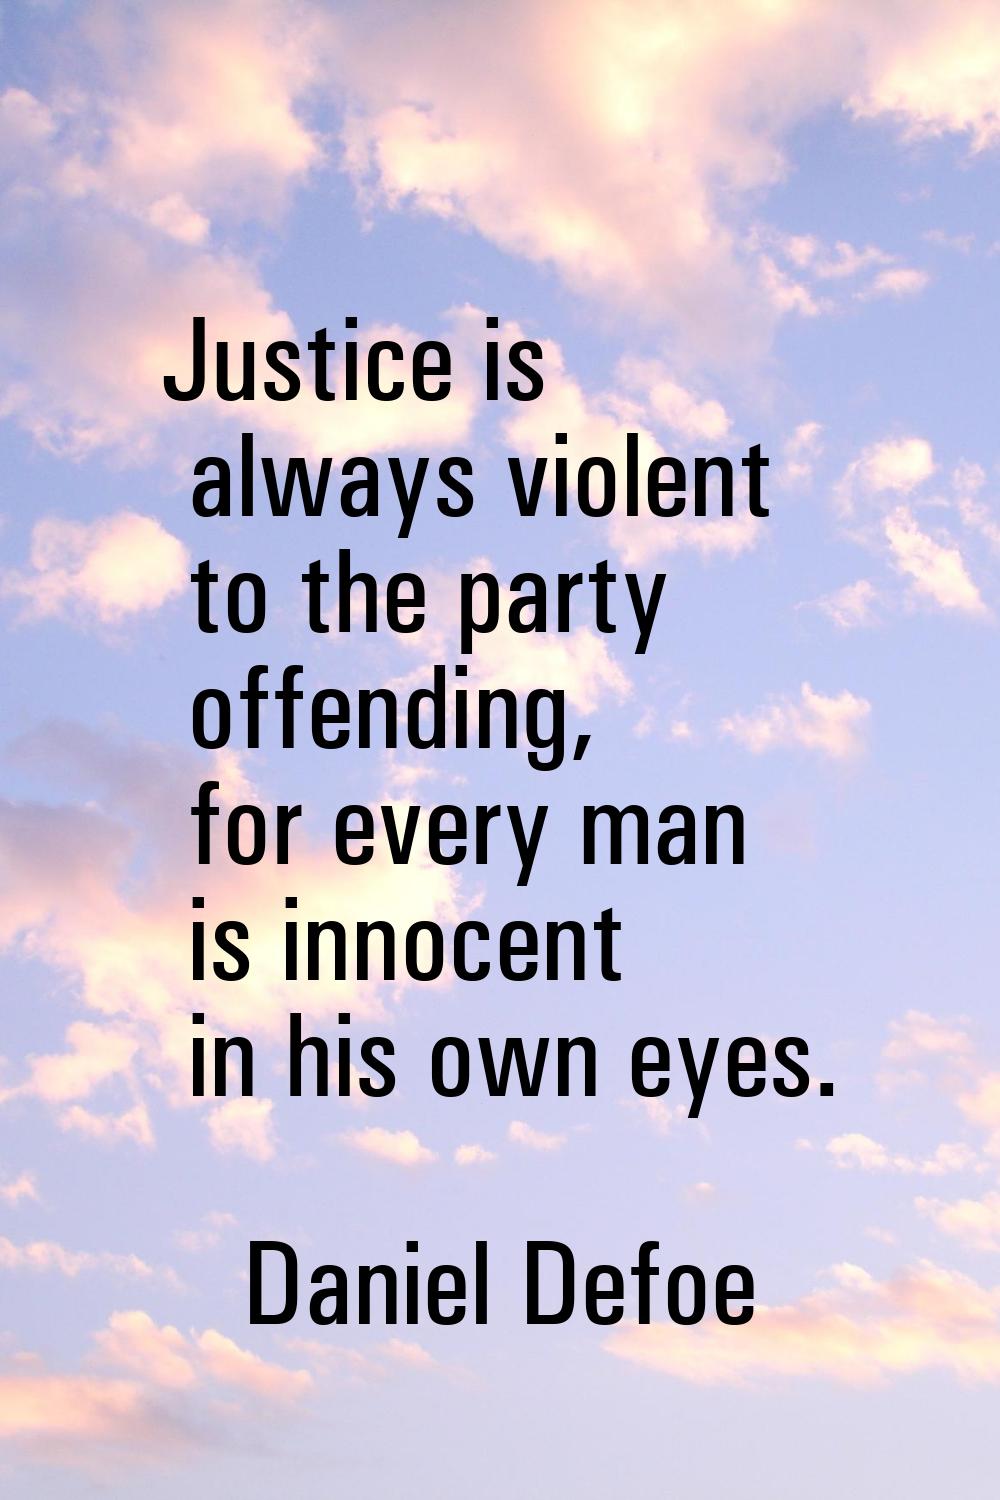 Justice is always violent to the party offending, for every man is innocent in his own eyes.